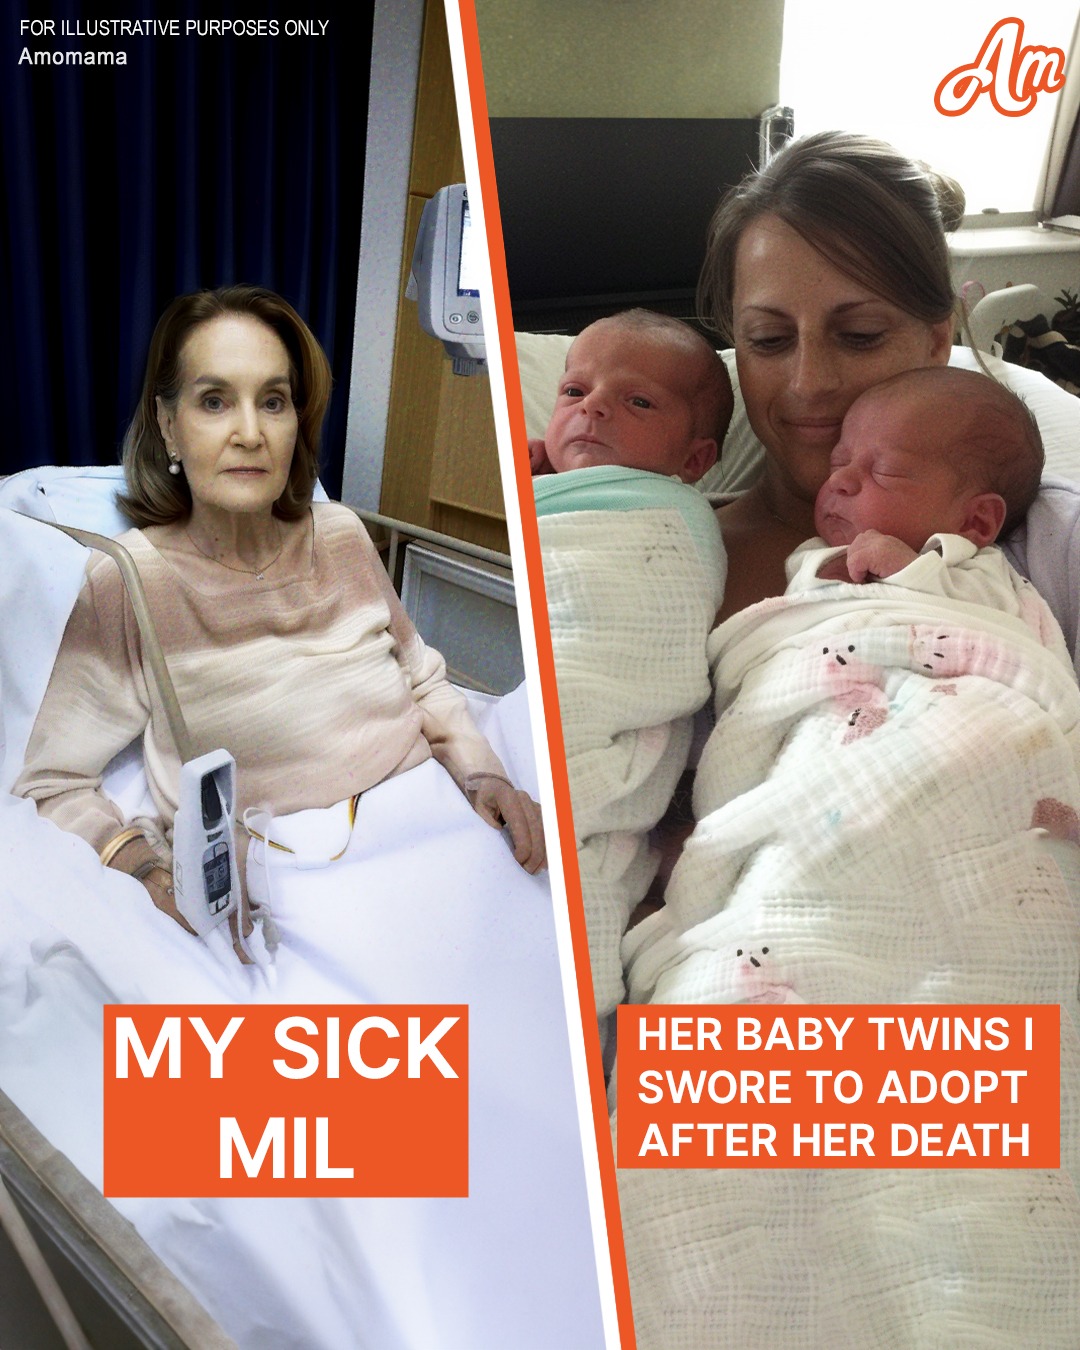 MY 51-YEAR-OLD MIL BEGGED ME TO ADOPT HER NEWBORN TWINS When she said this terrible reason, I was shattered. So, I had to make the toughest choice👇